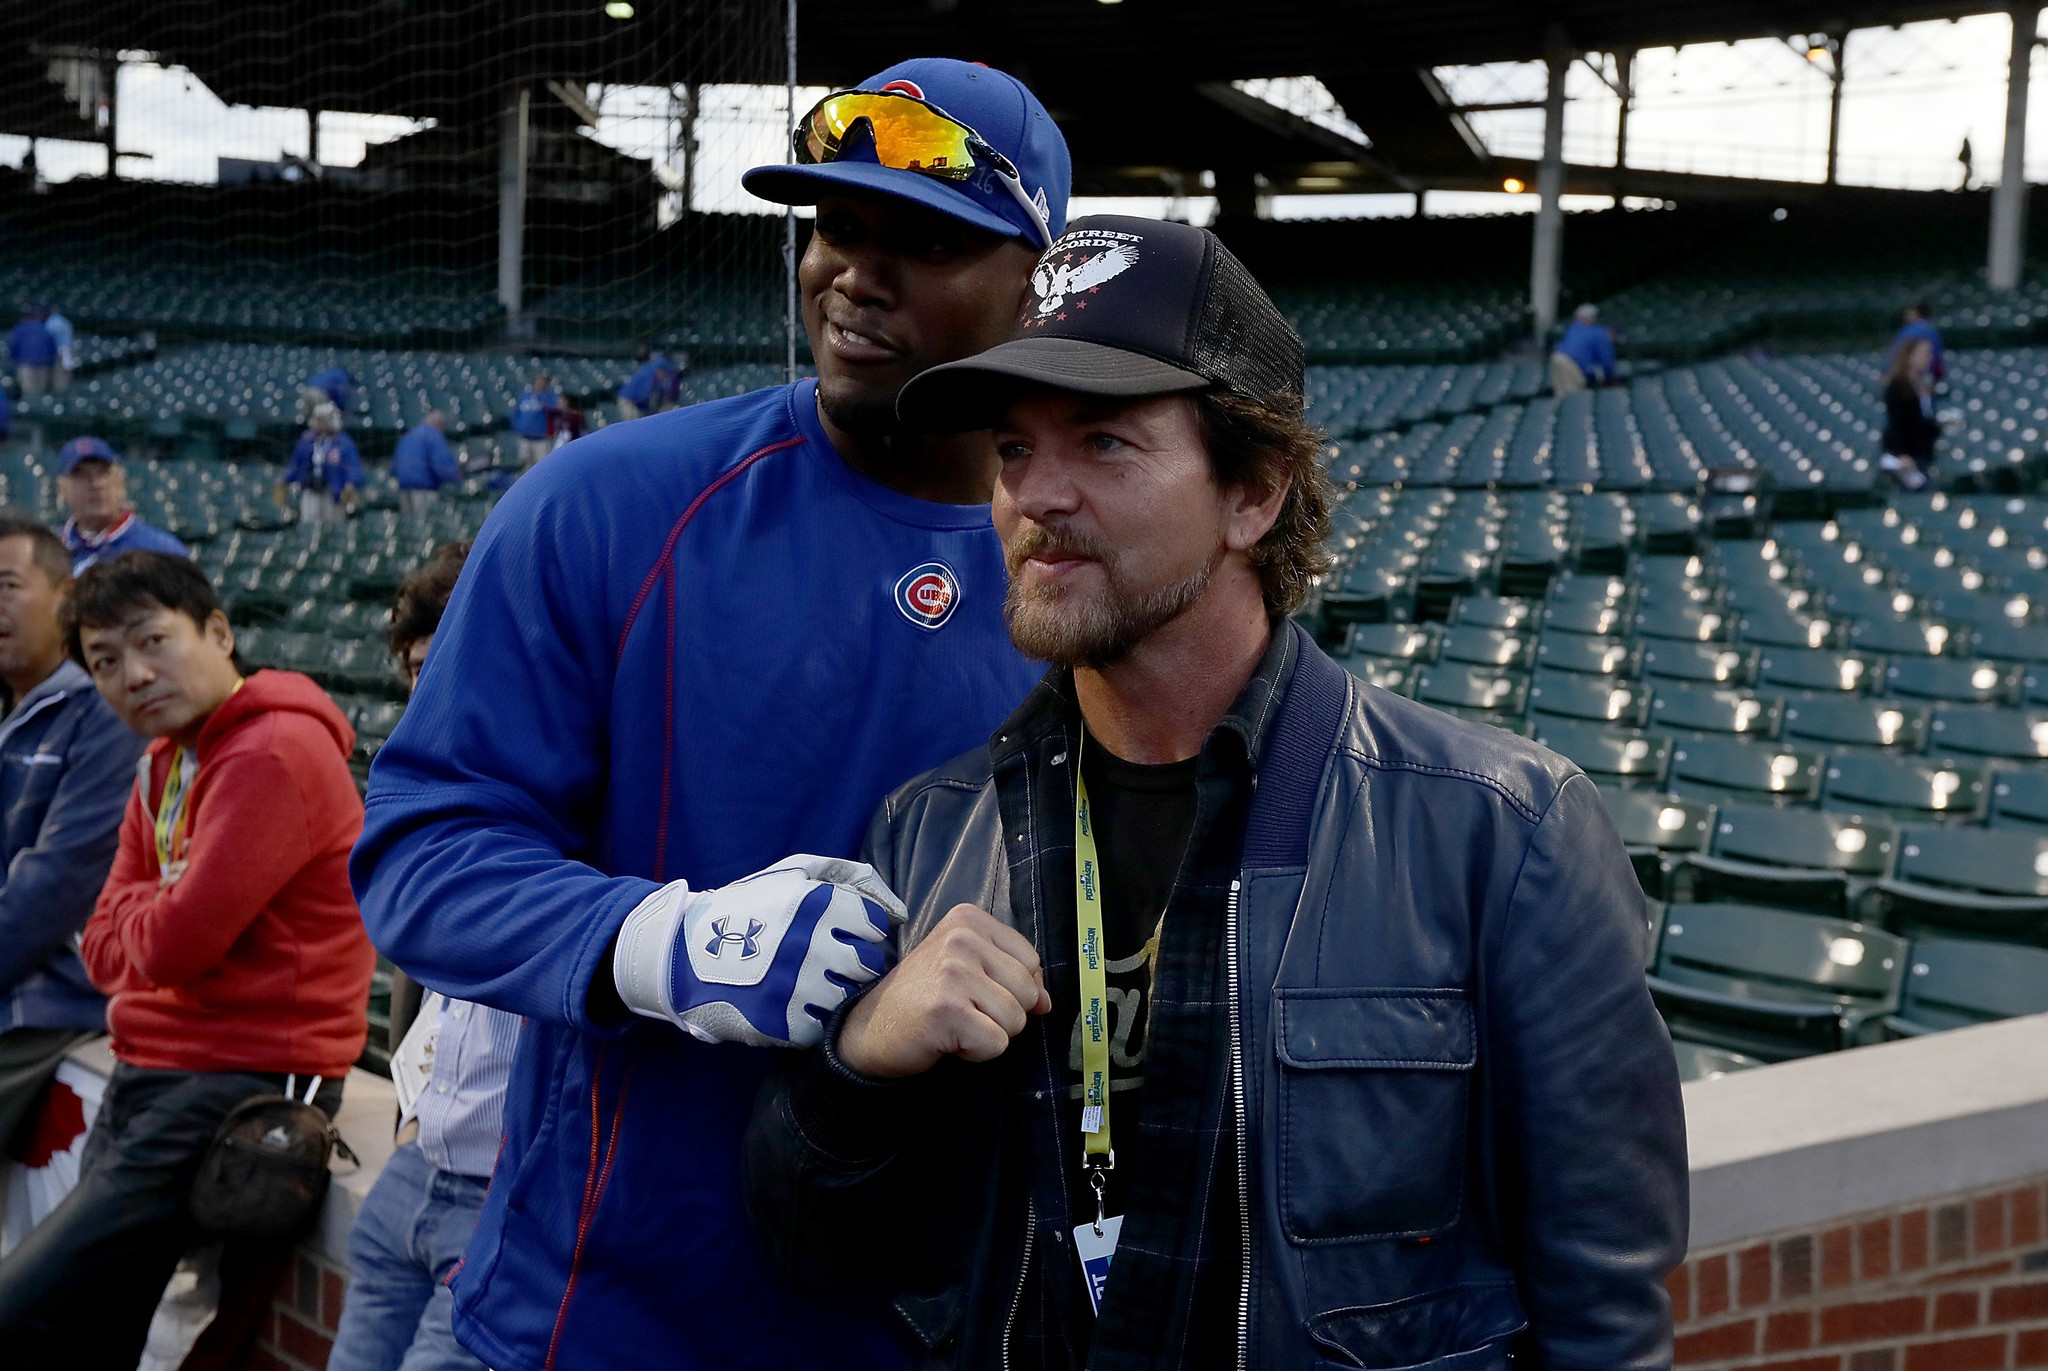 Pearl Jam's Eddie Vedder all-in on Cubs going 'All the Way' - Chicago Tribune